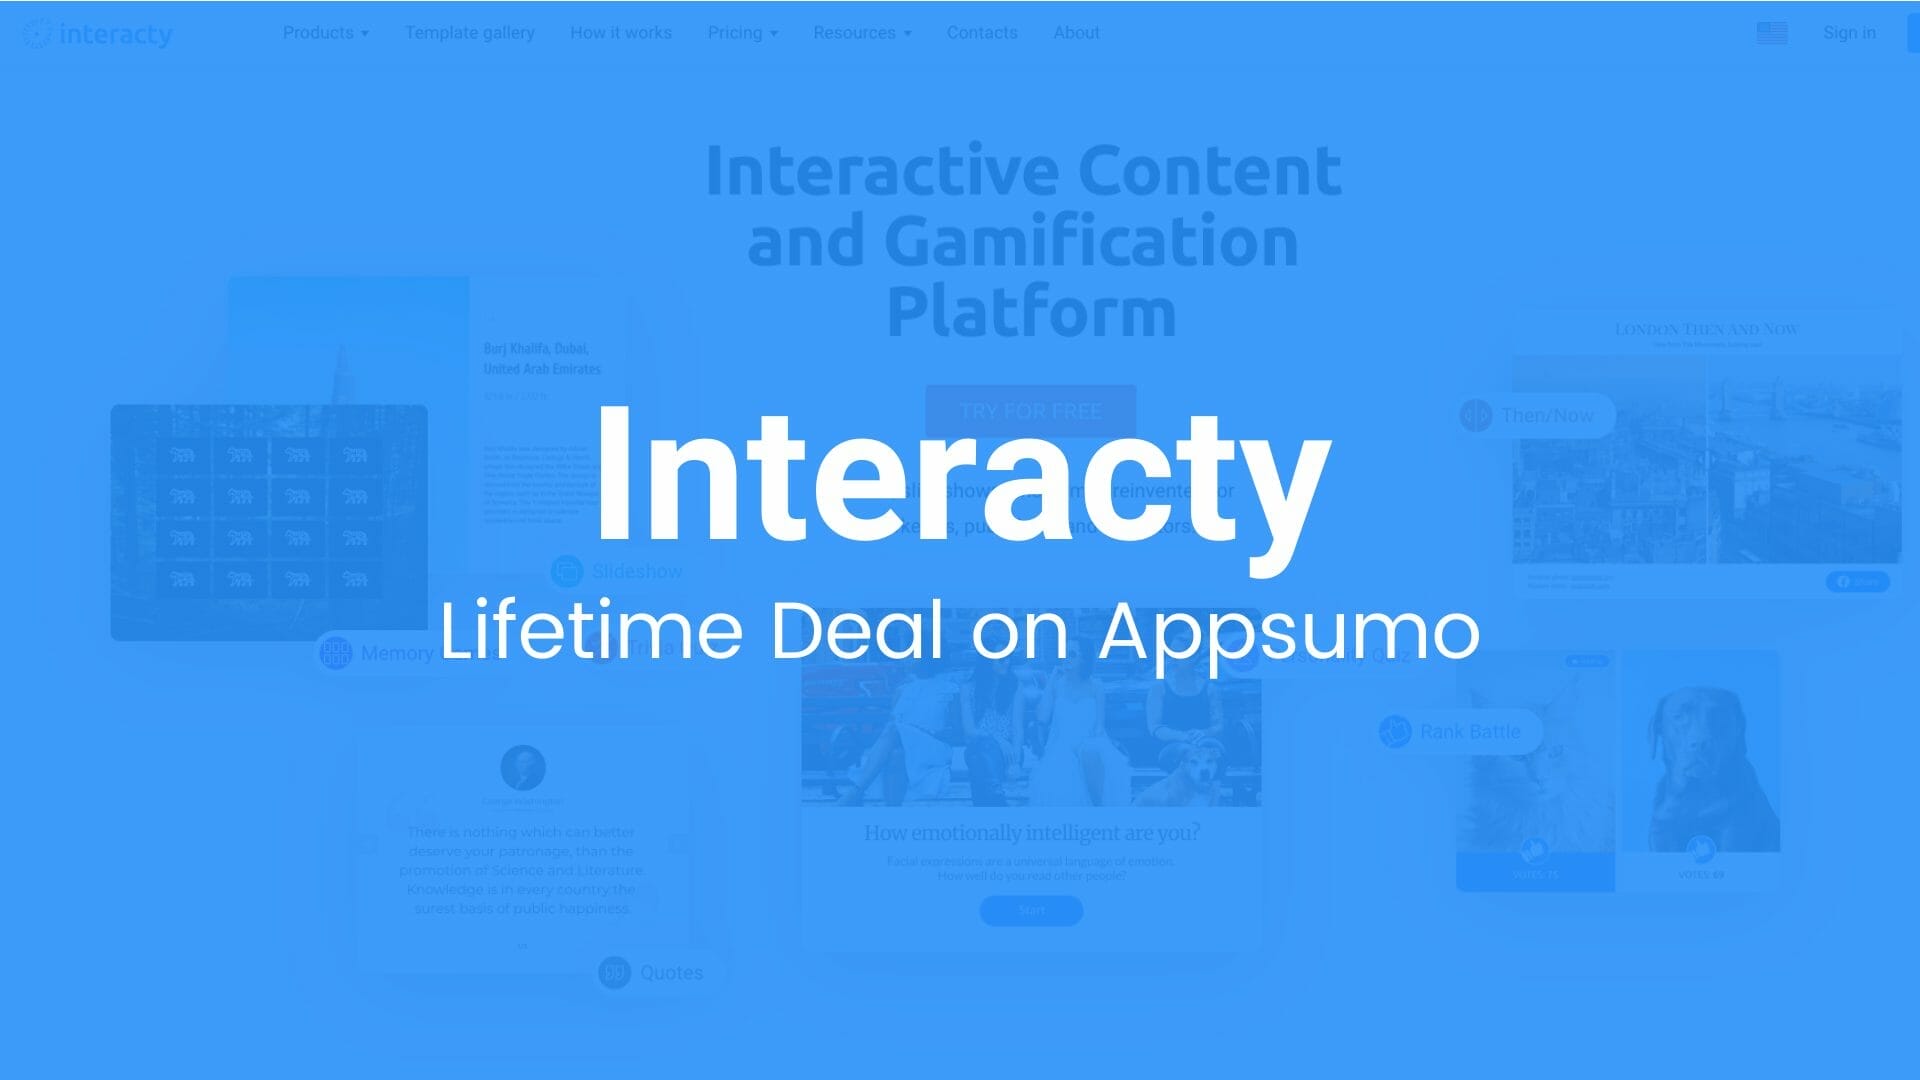 Interacty: Interactive Content and Gamification Platform